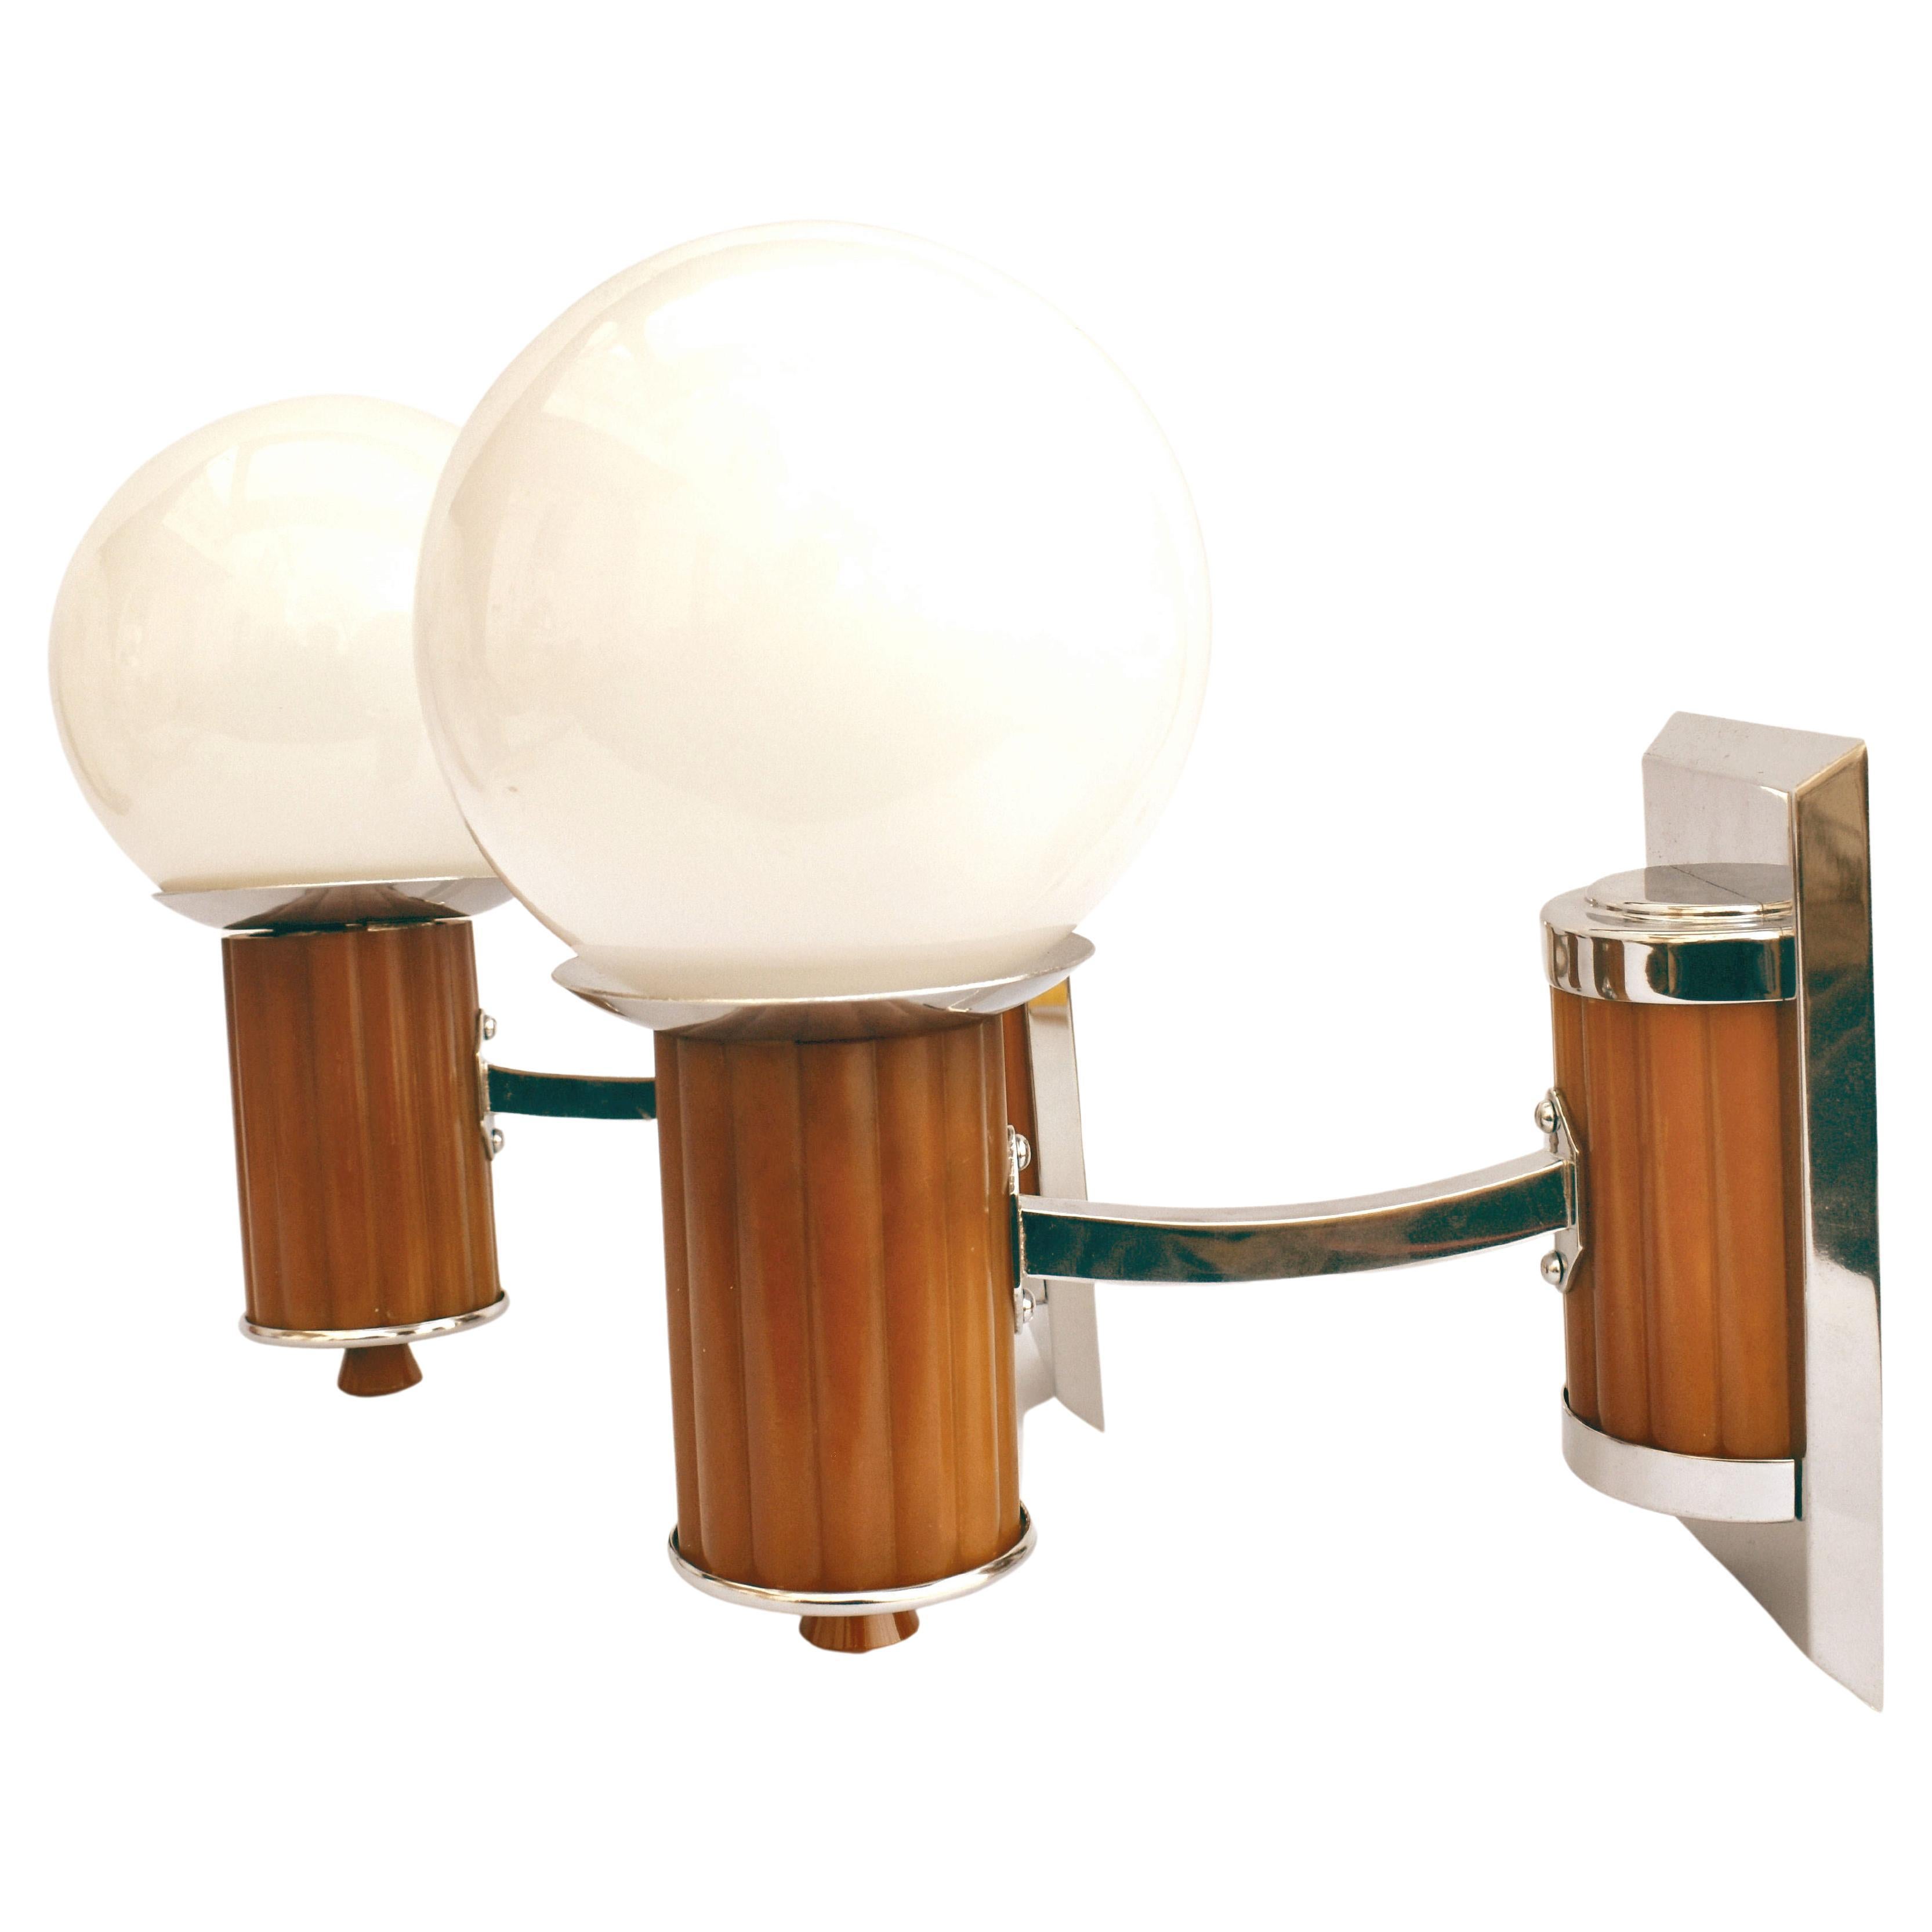 A very rare chance to acquire a pair of matching Art Deco wall light sconces. Made from butterscotch coloured catalin/phenolic Bakelite and newly re-chromed metal-ware with white milk coloured globe shades. These lights make a great statement to any